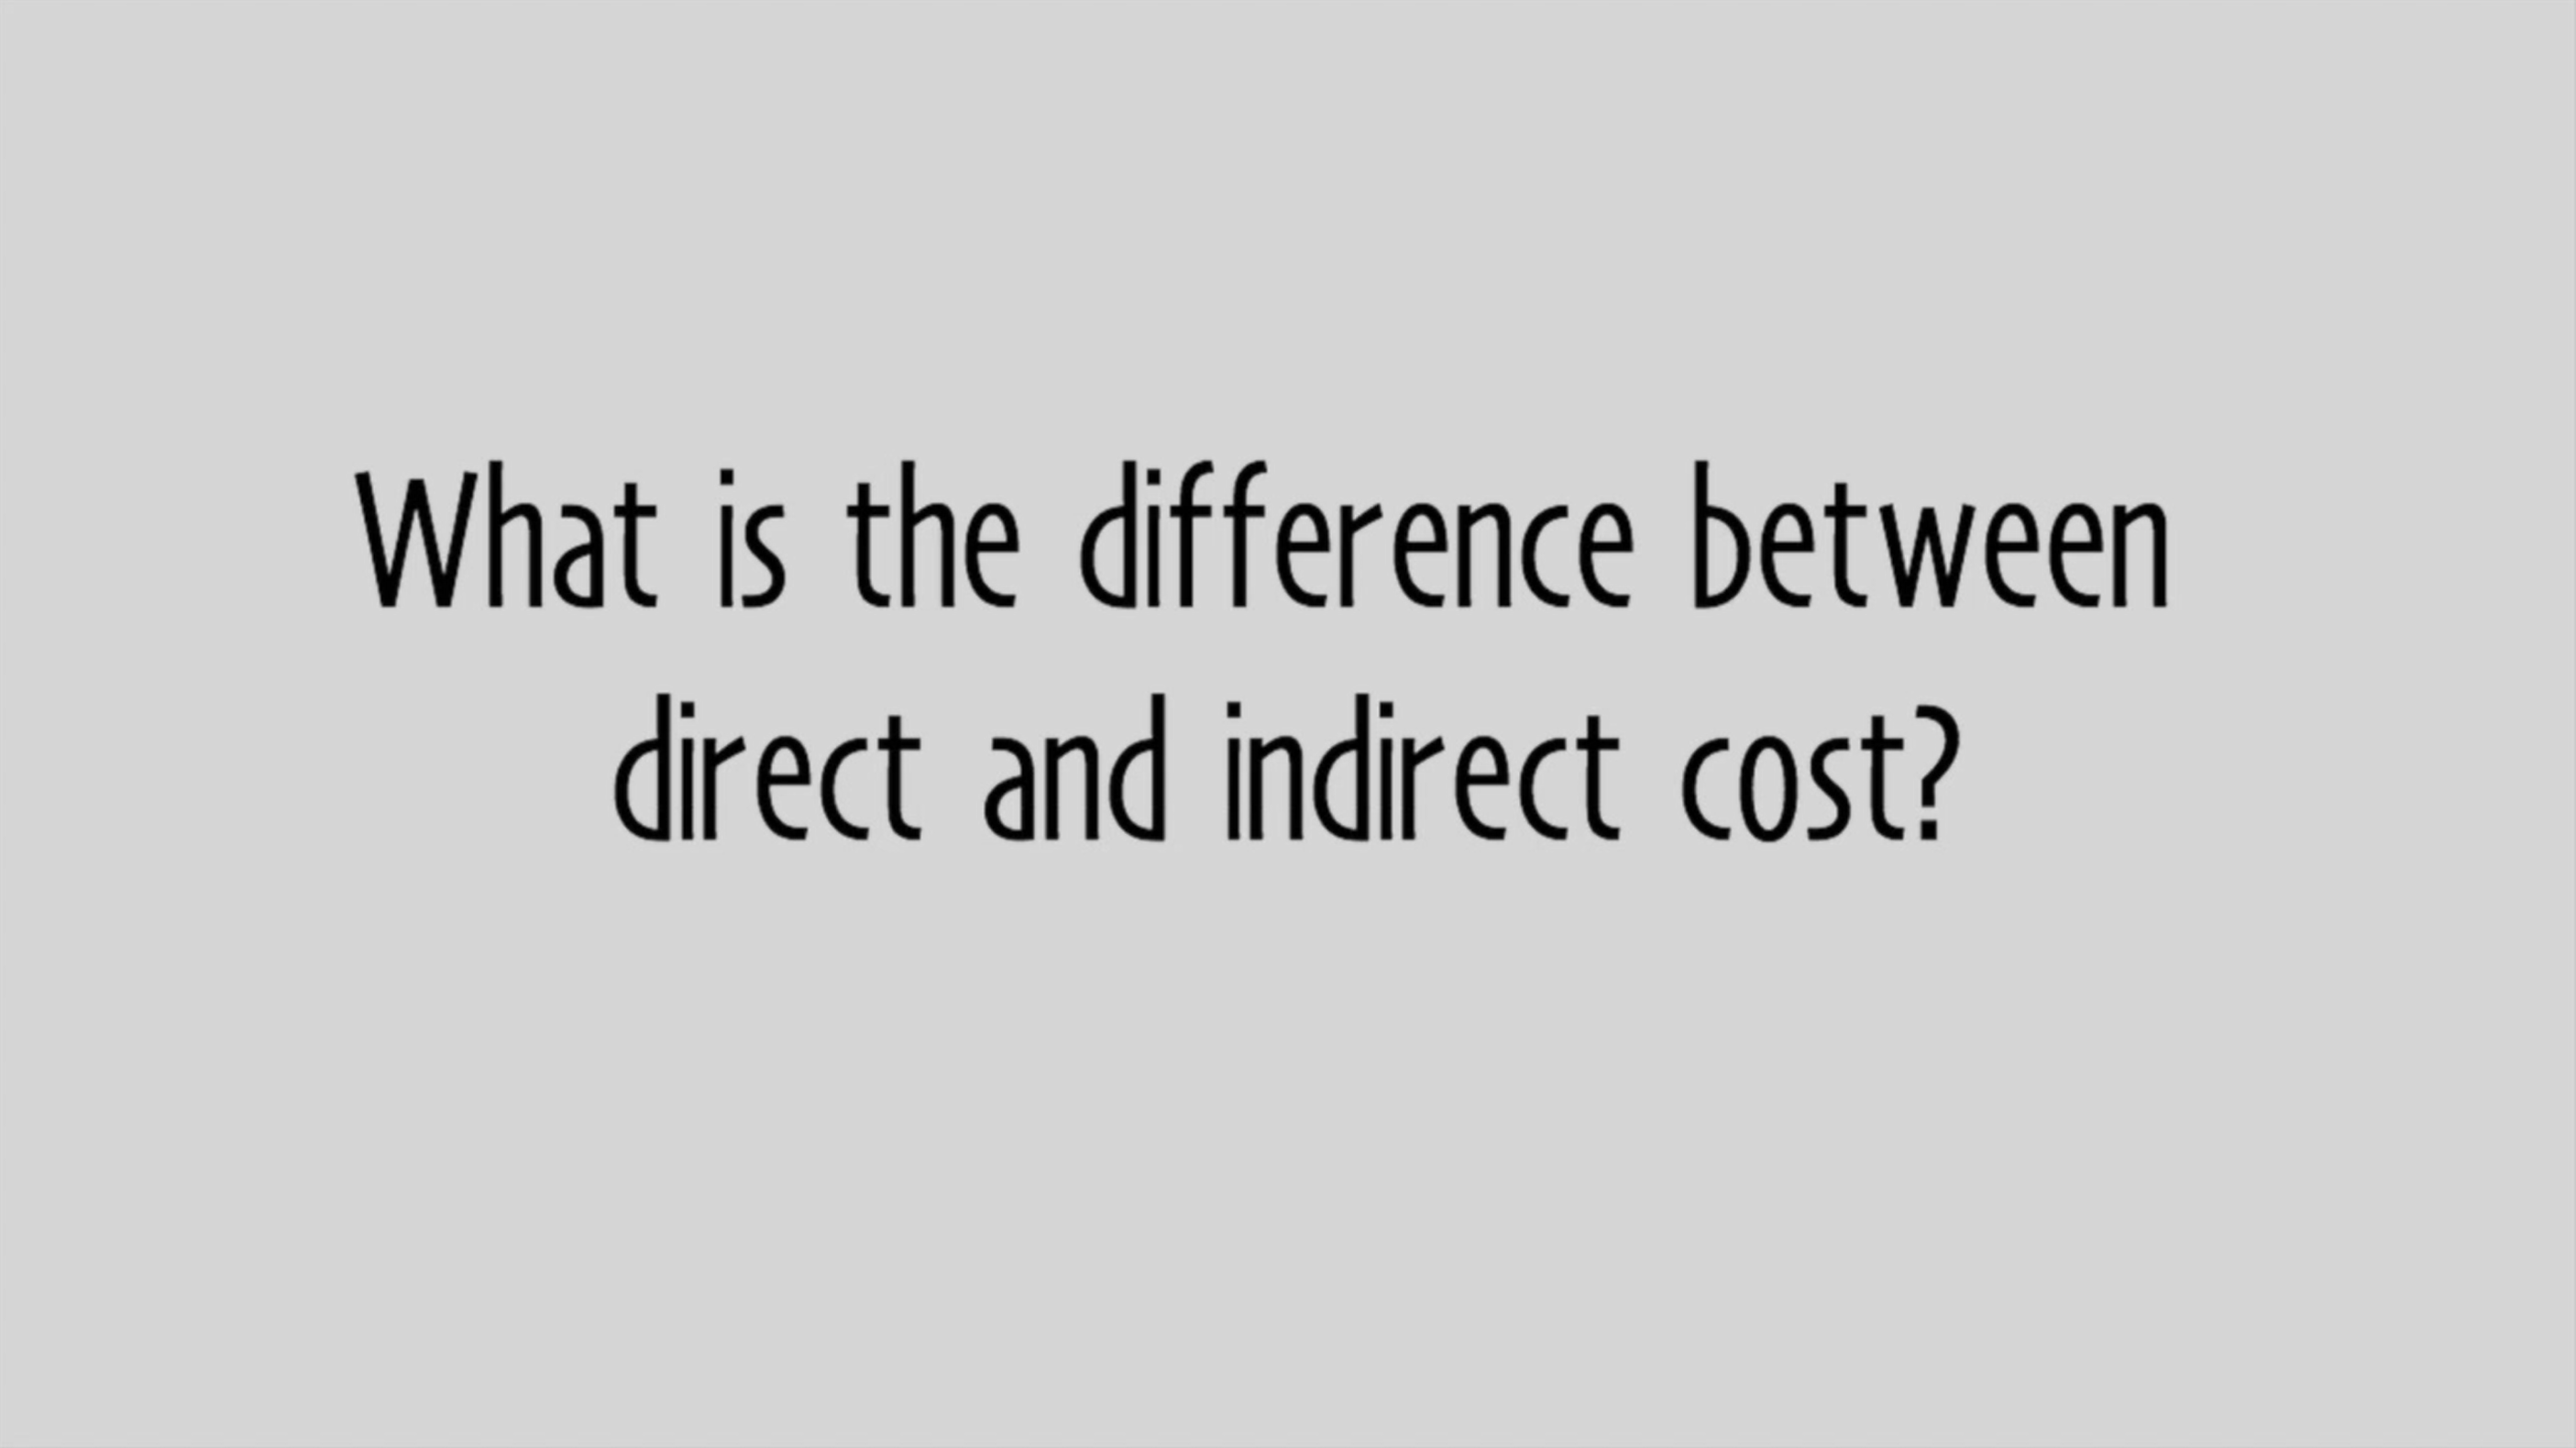 Play 'What is the difference between direct and indirect cost?'